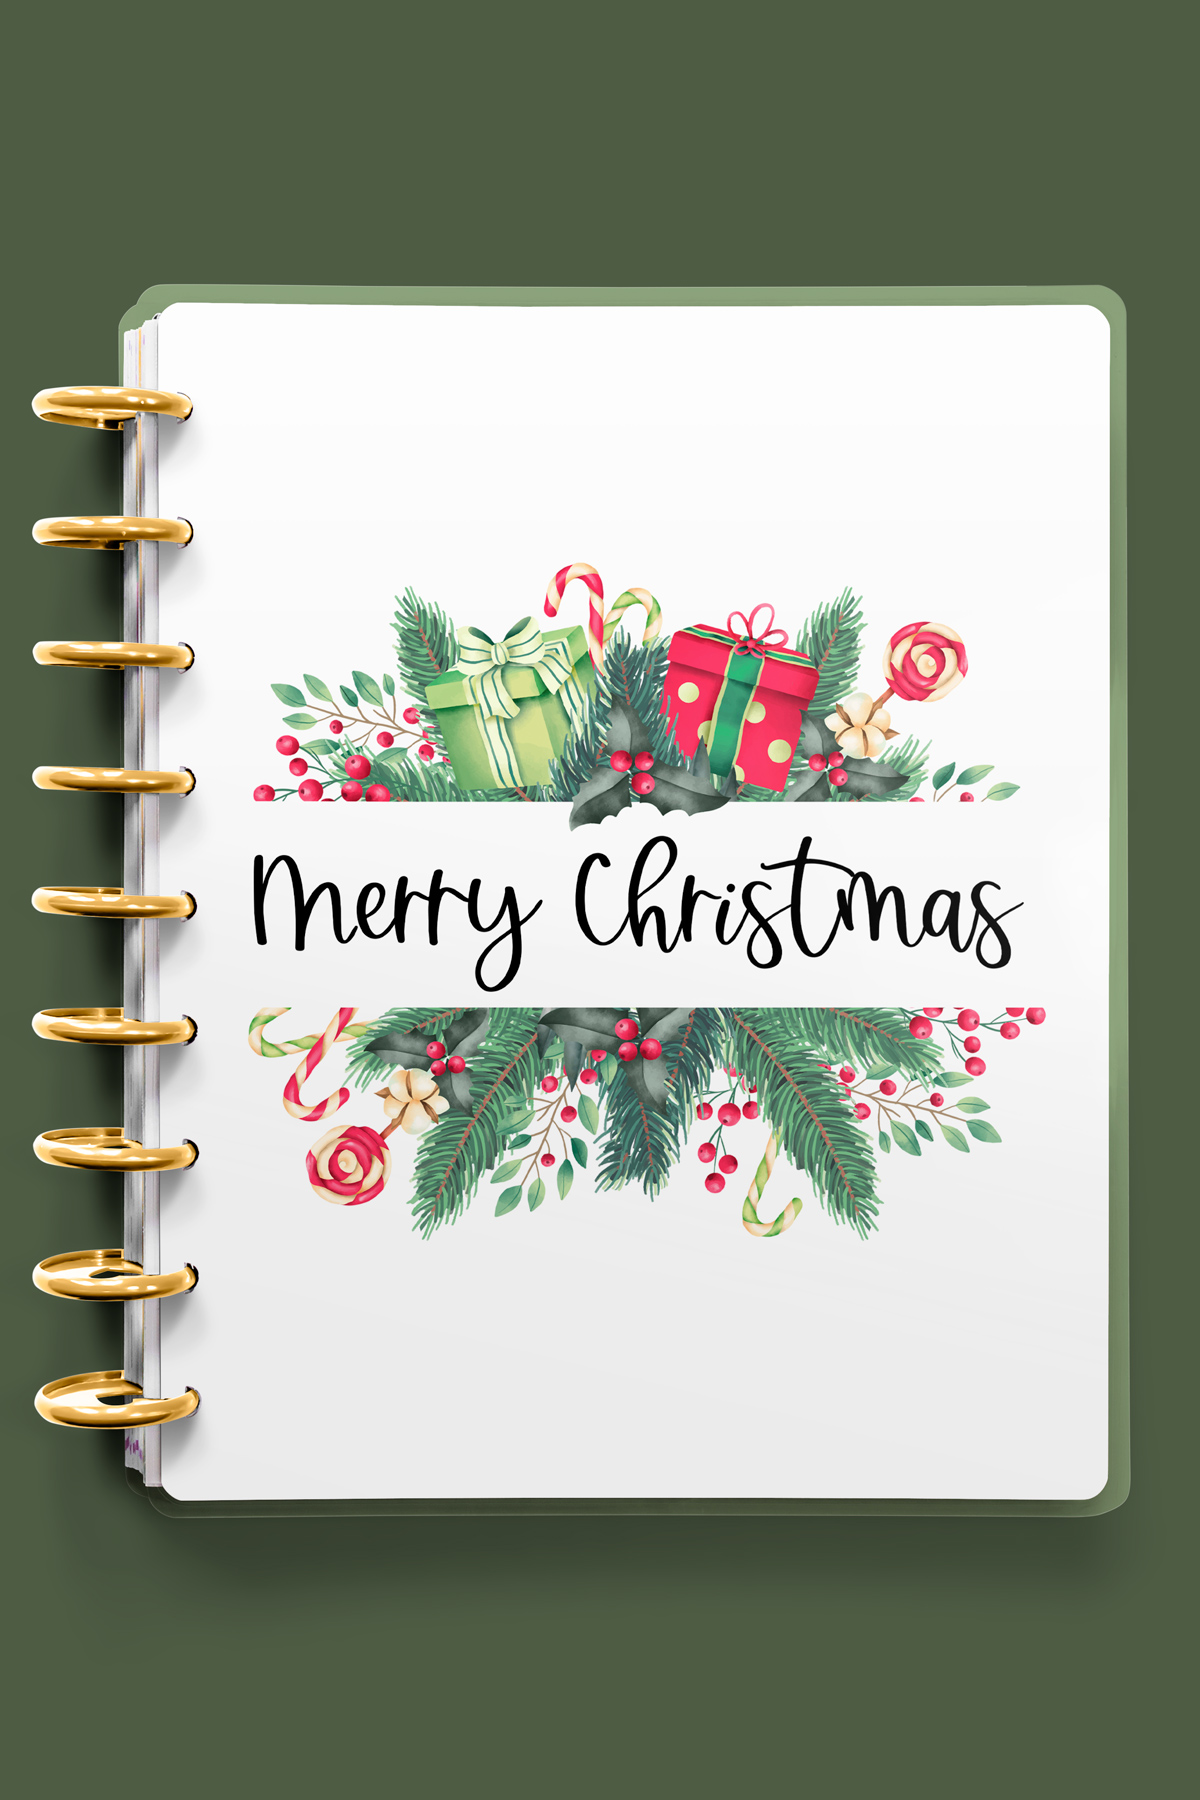 This image shows one of the designs you can get in this free Merry Christmas planner cover and inserts set. It has Christmas florals and Christmas gifts on it.